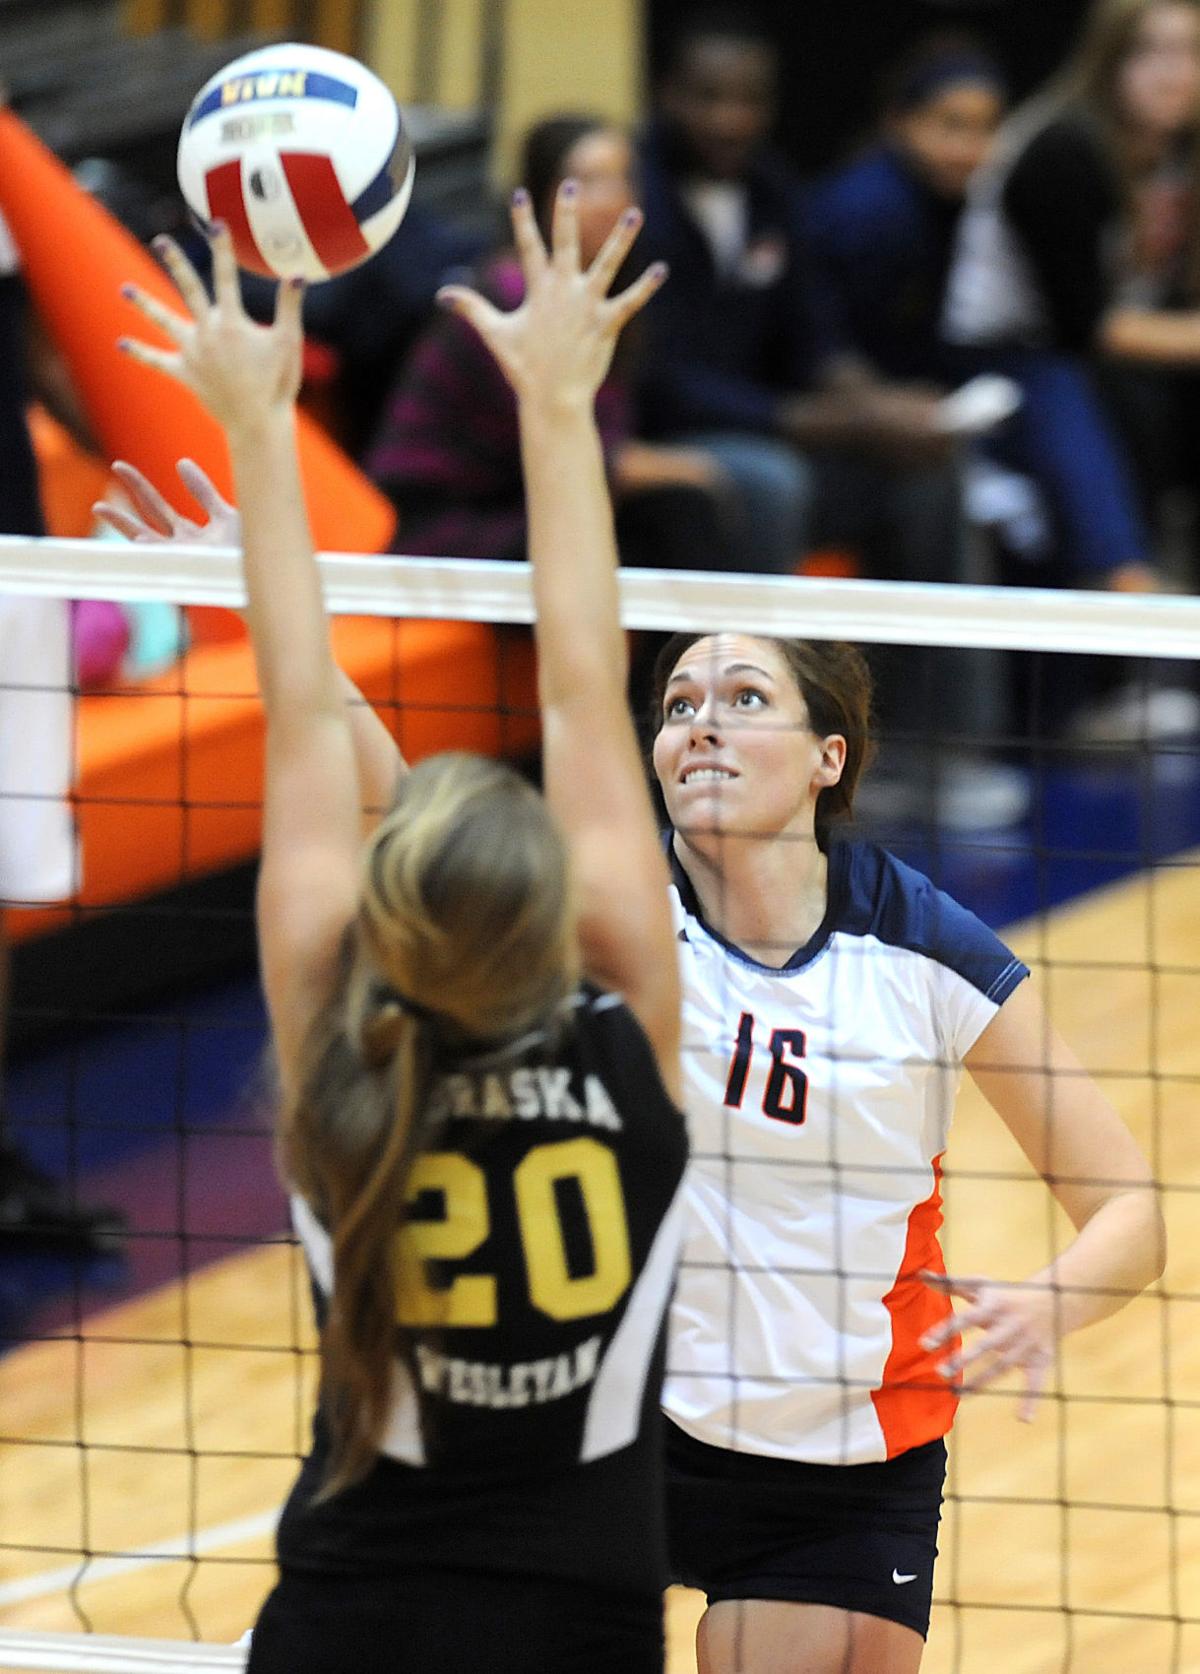 Midland volleyball coach turning program around with in-state talent ...